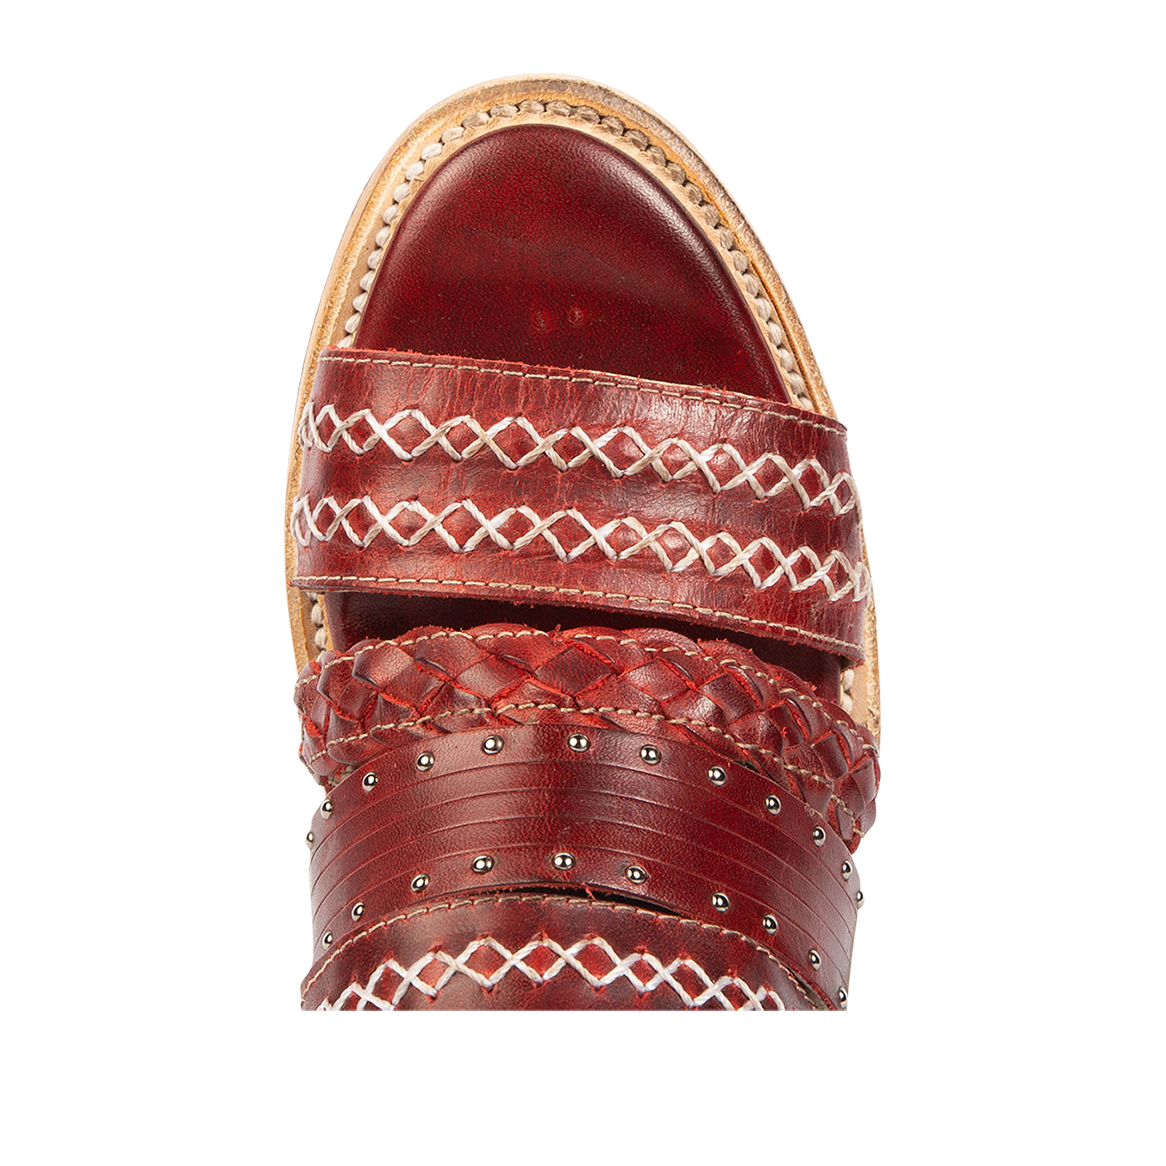 Top view showing braided and stitch detailed straps on FREEBIRD women's Albuquerque red open-toe slip-on sandal